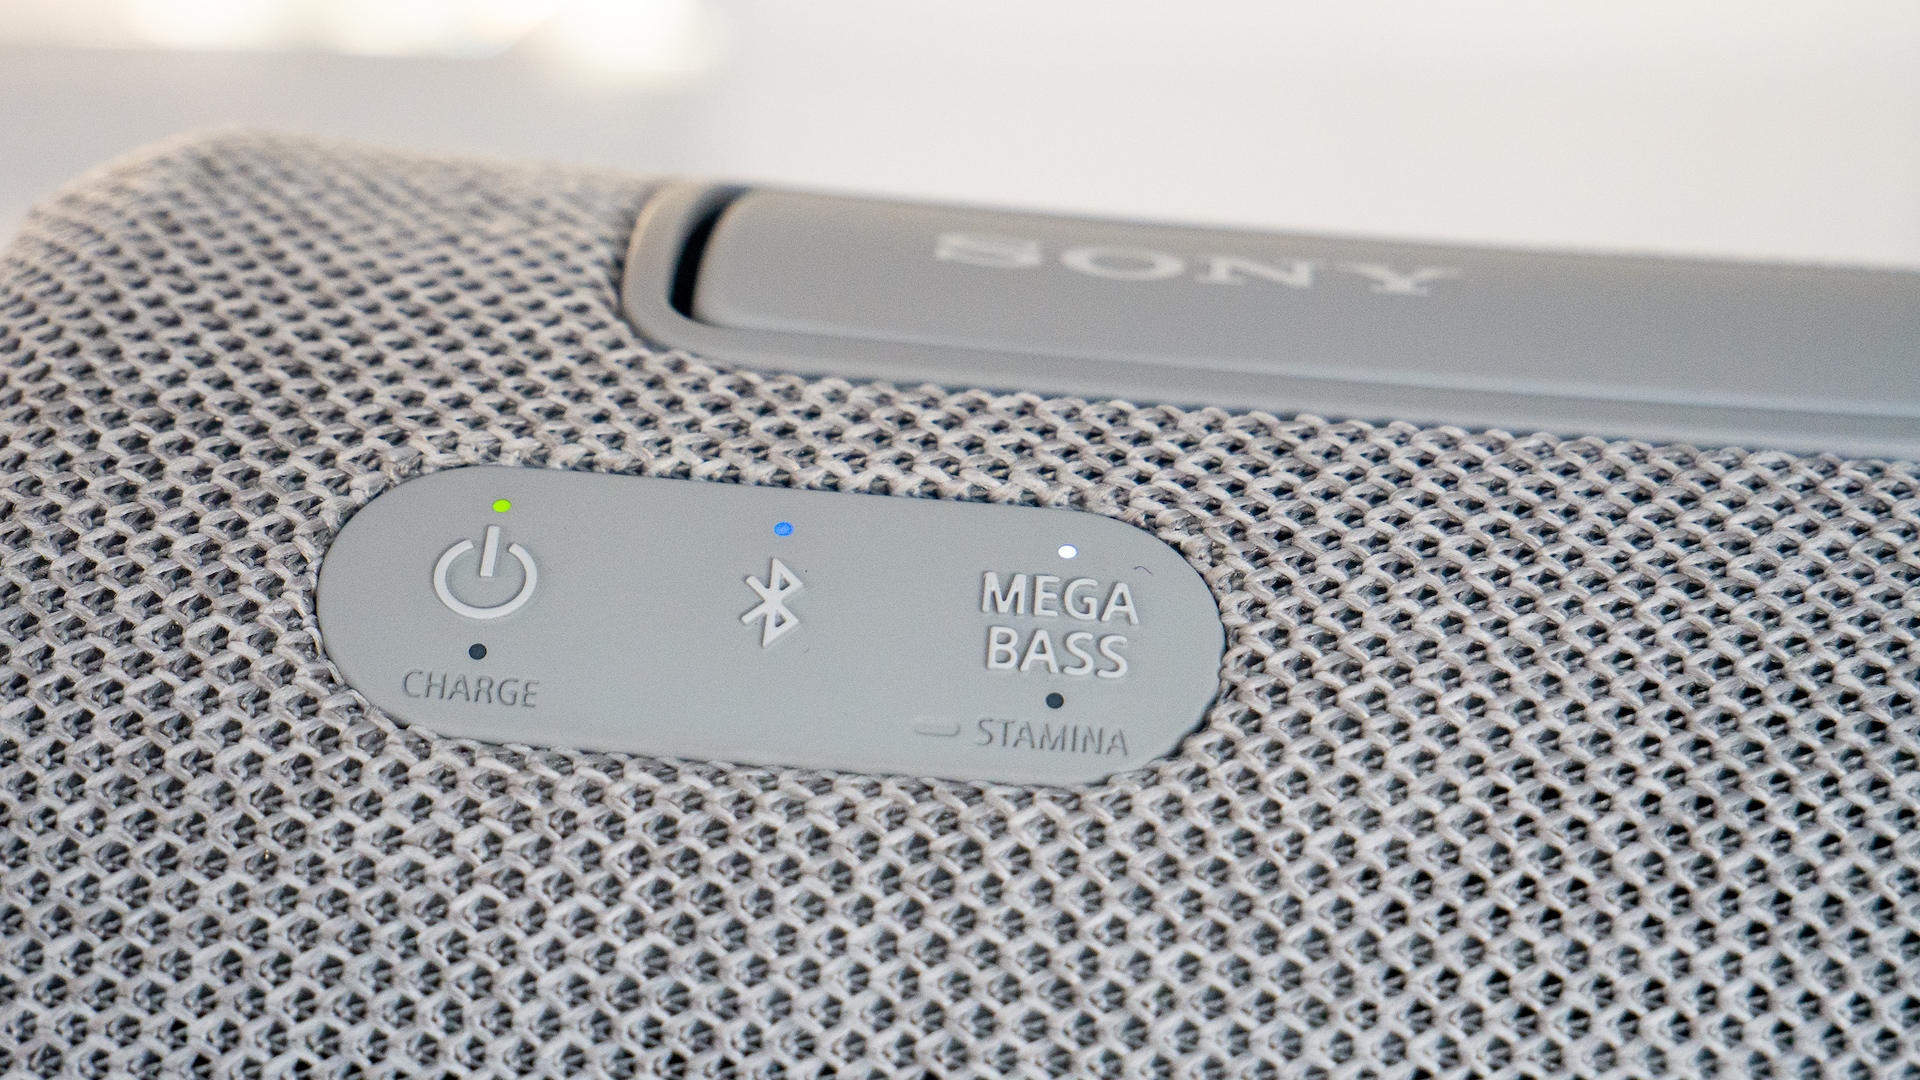 Image of physical button of Bluetooth speaker XG300 From Sony